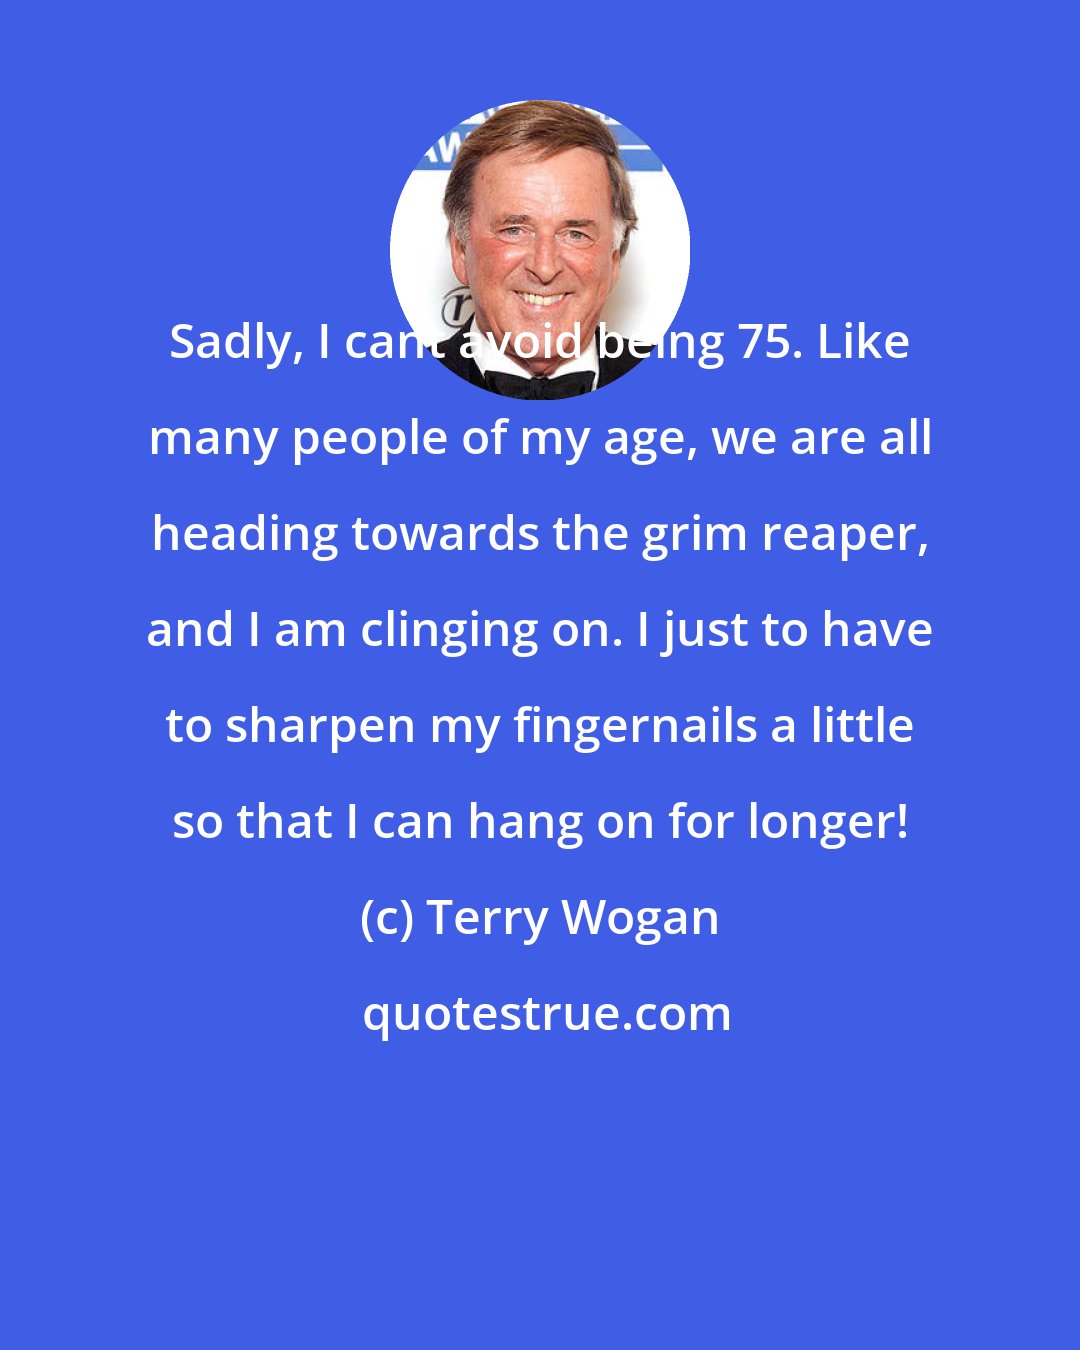 Terry Wogan: Sadly, I cant avoid being 75. Like many people of my age, we are all heading towards the grim reaper, and I am clinging on. I just to have to sharpen my fingernails a little so that I can hang on for longer!